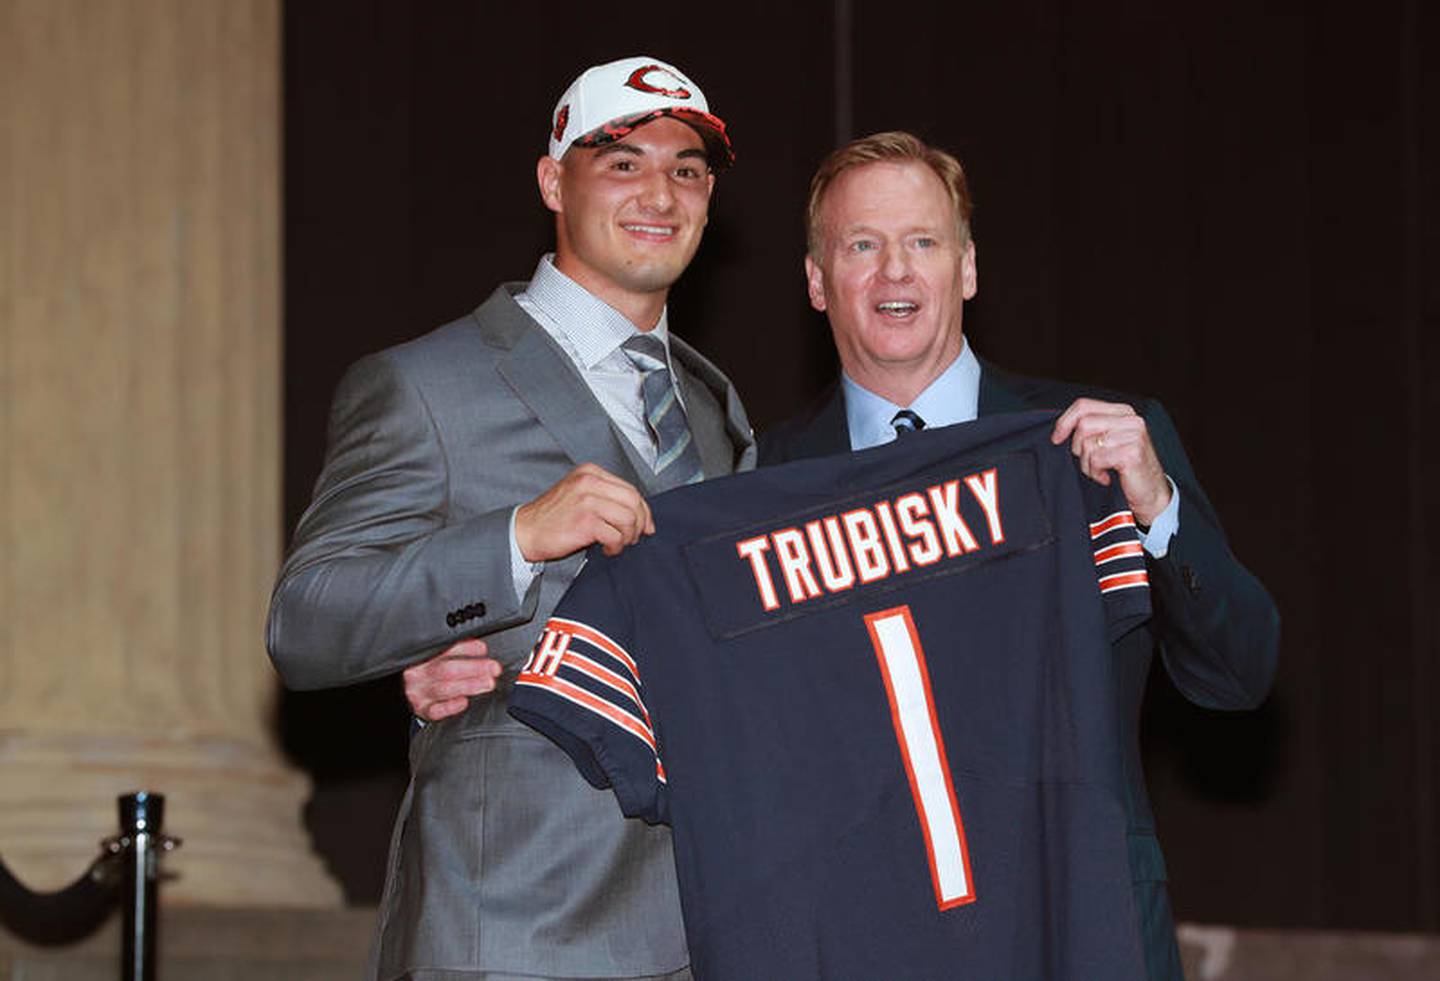 Mitch Trubisky, left, poses with NFL commissioner Roger Goodell after being selected by the Chicago Bears with the No. 2 overall pick in the 2017 NFL draft.